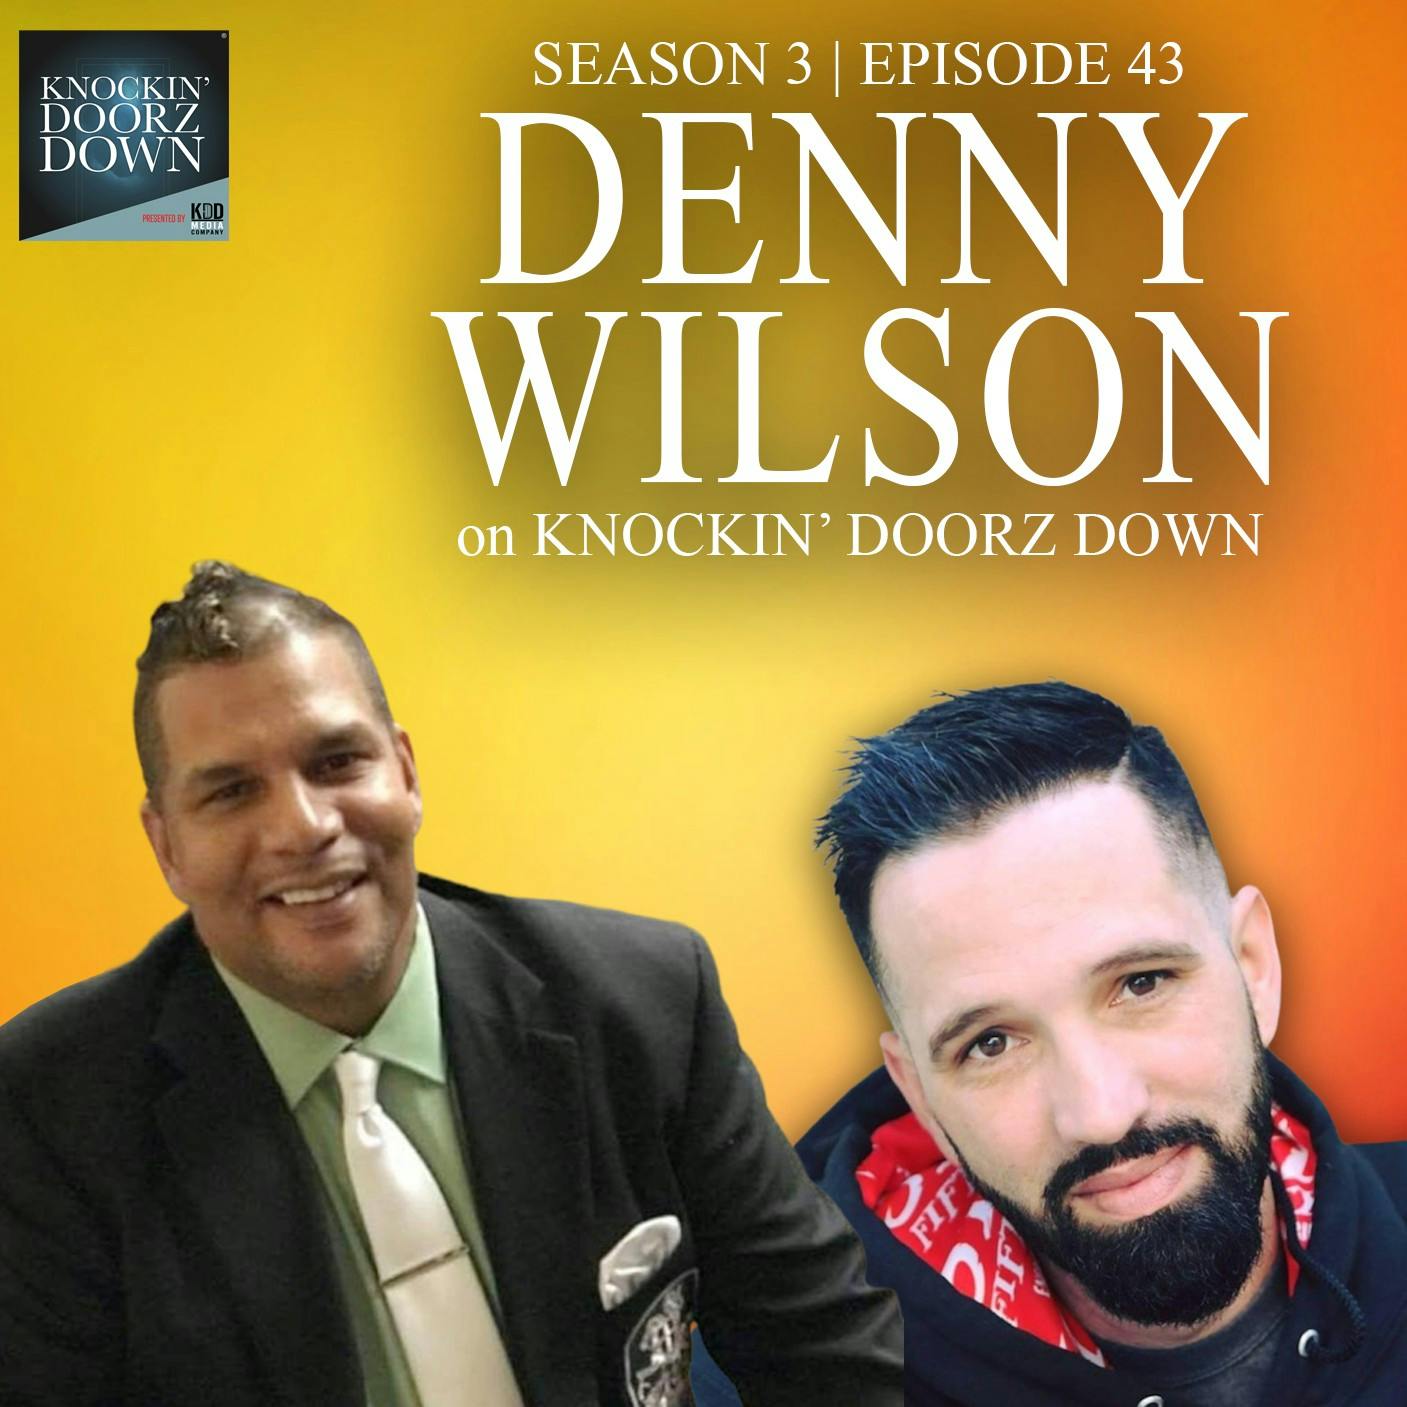 Denny Wilson | From Wanting To End His Life, Sobriety, Author And Being A Recovery Community Leader